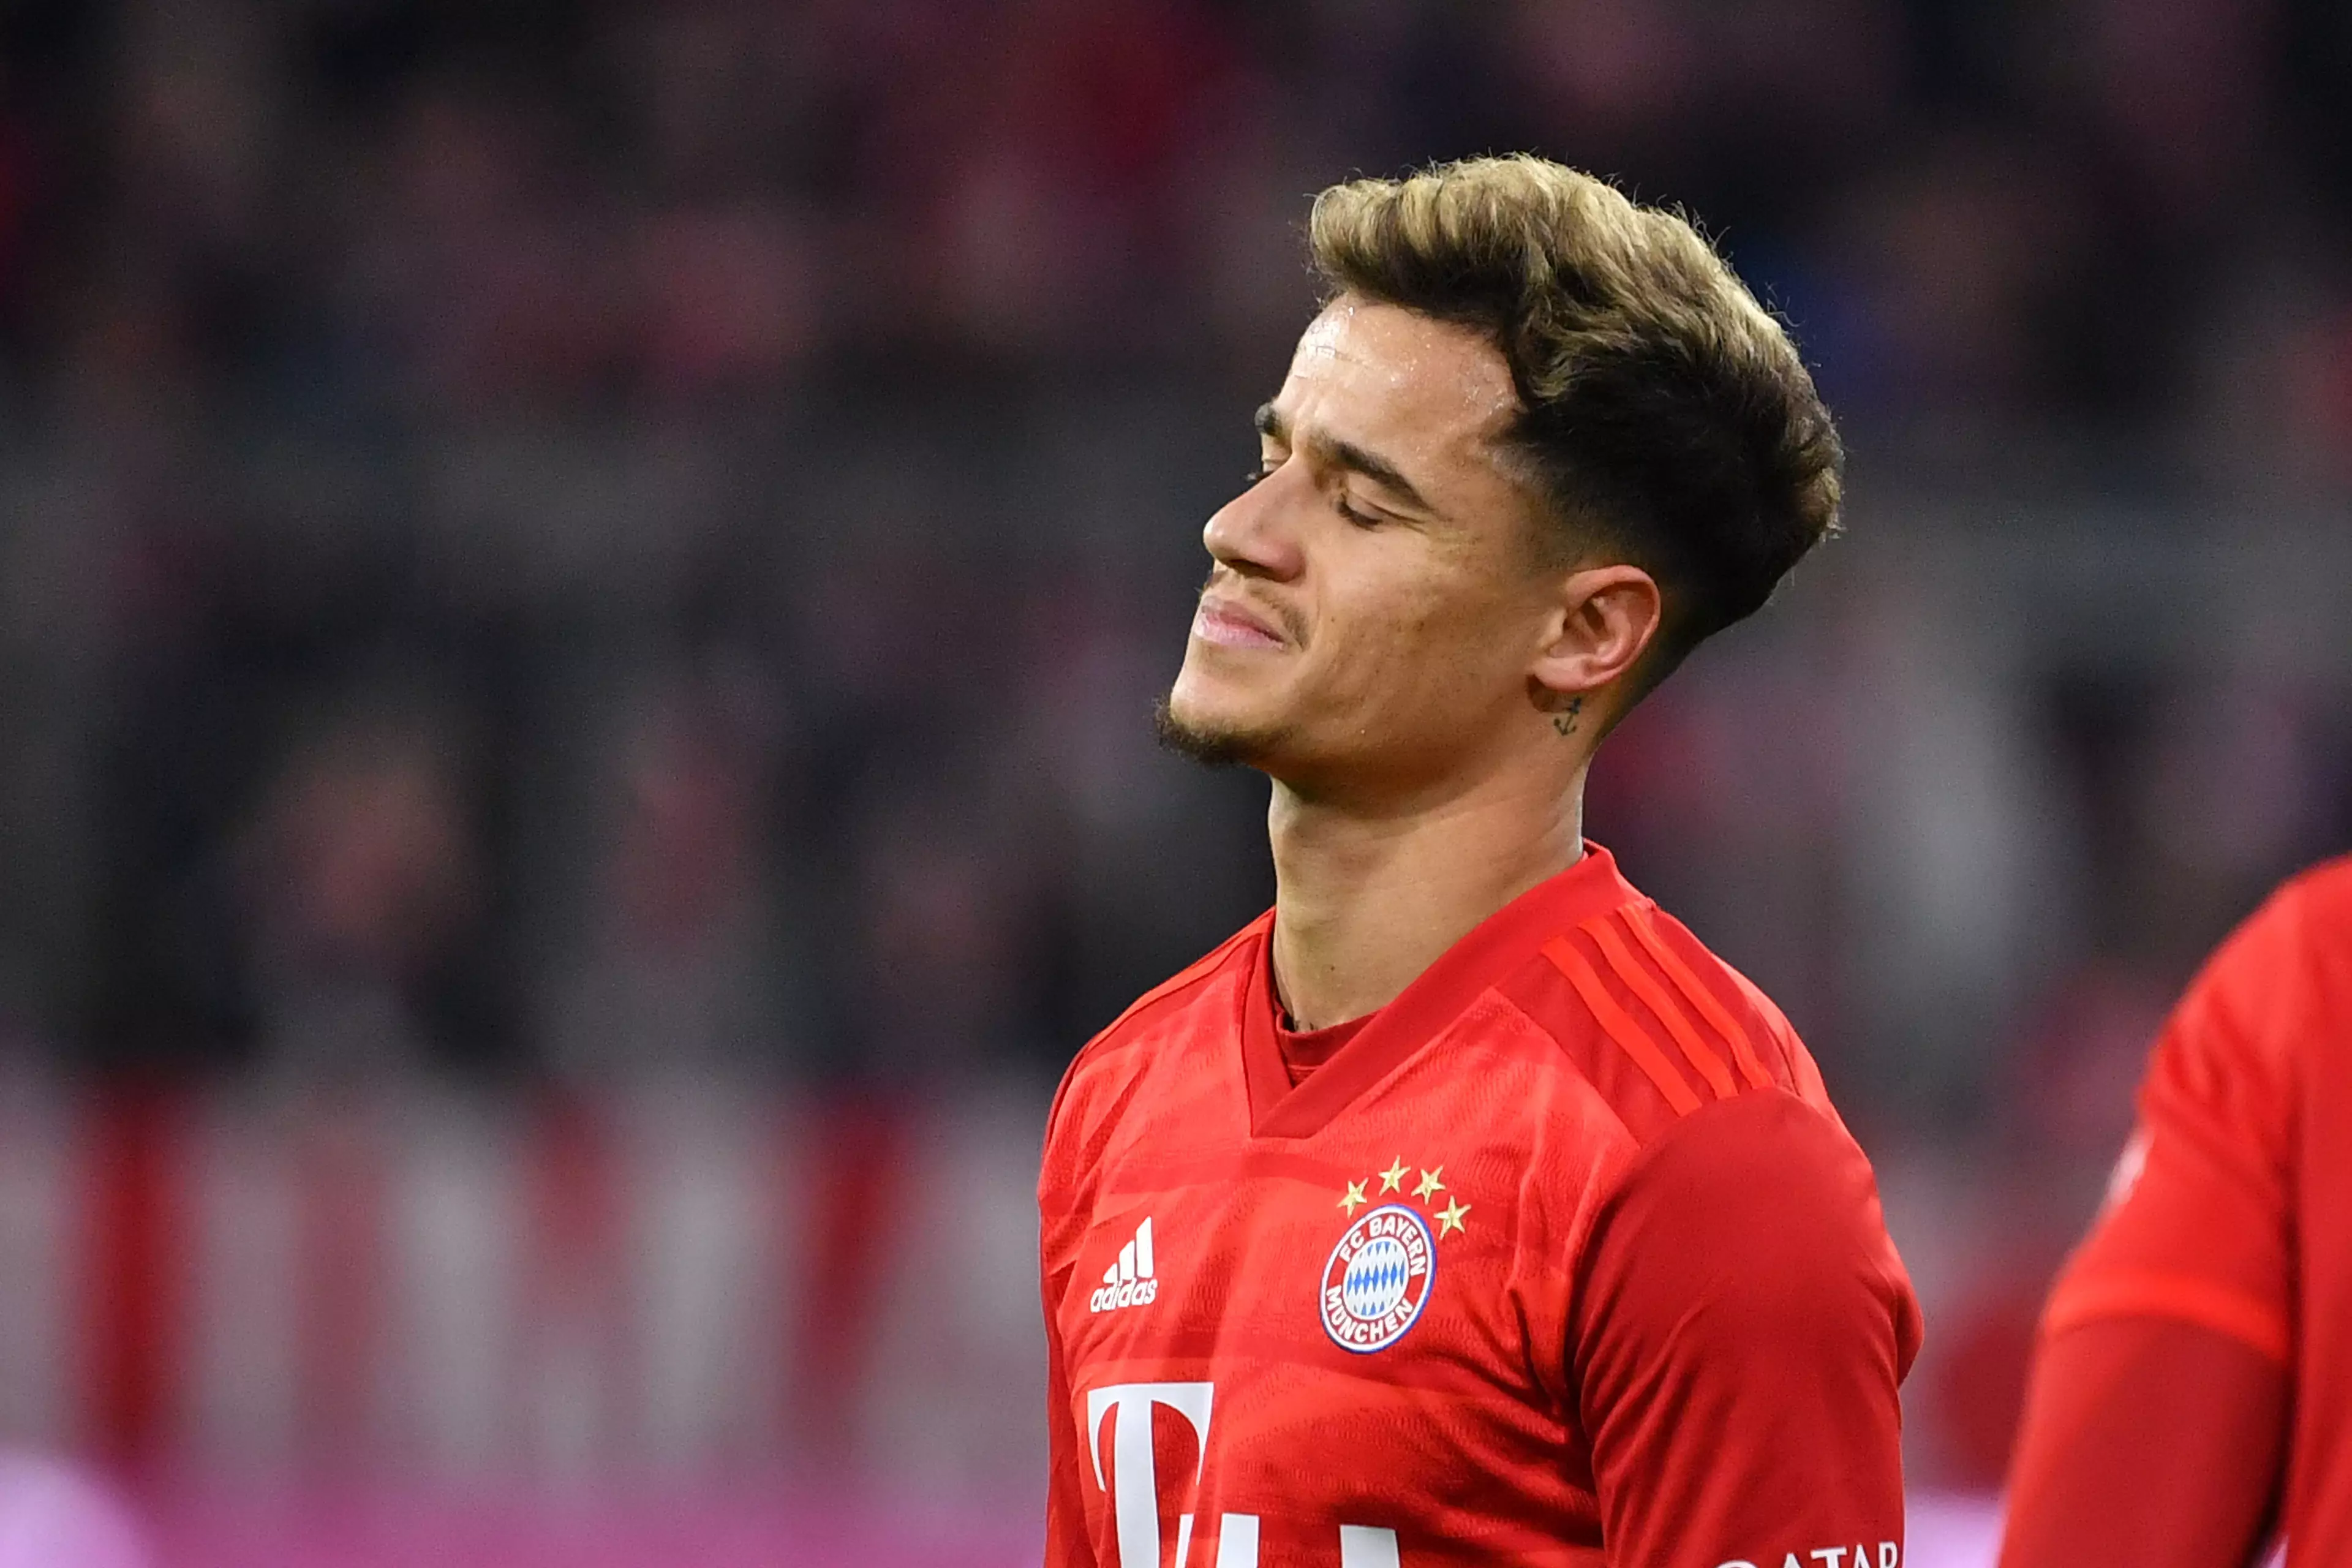 Coutinho has had a frustrating time at Barca and now Bayern. Image: PA Images